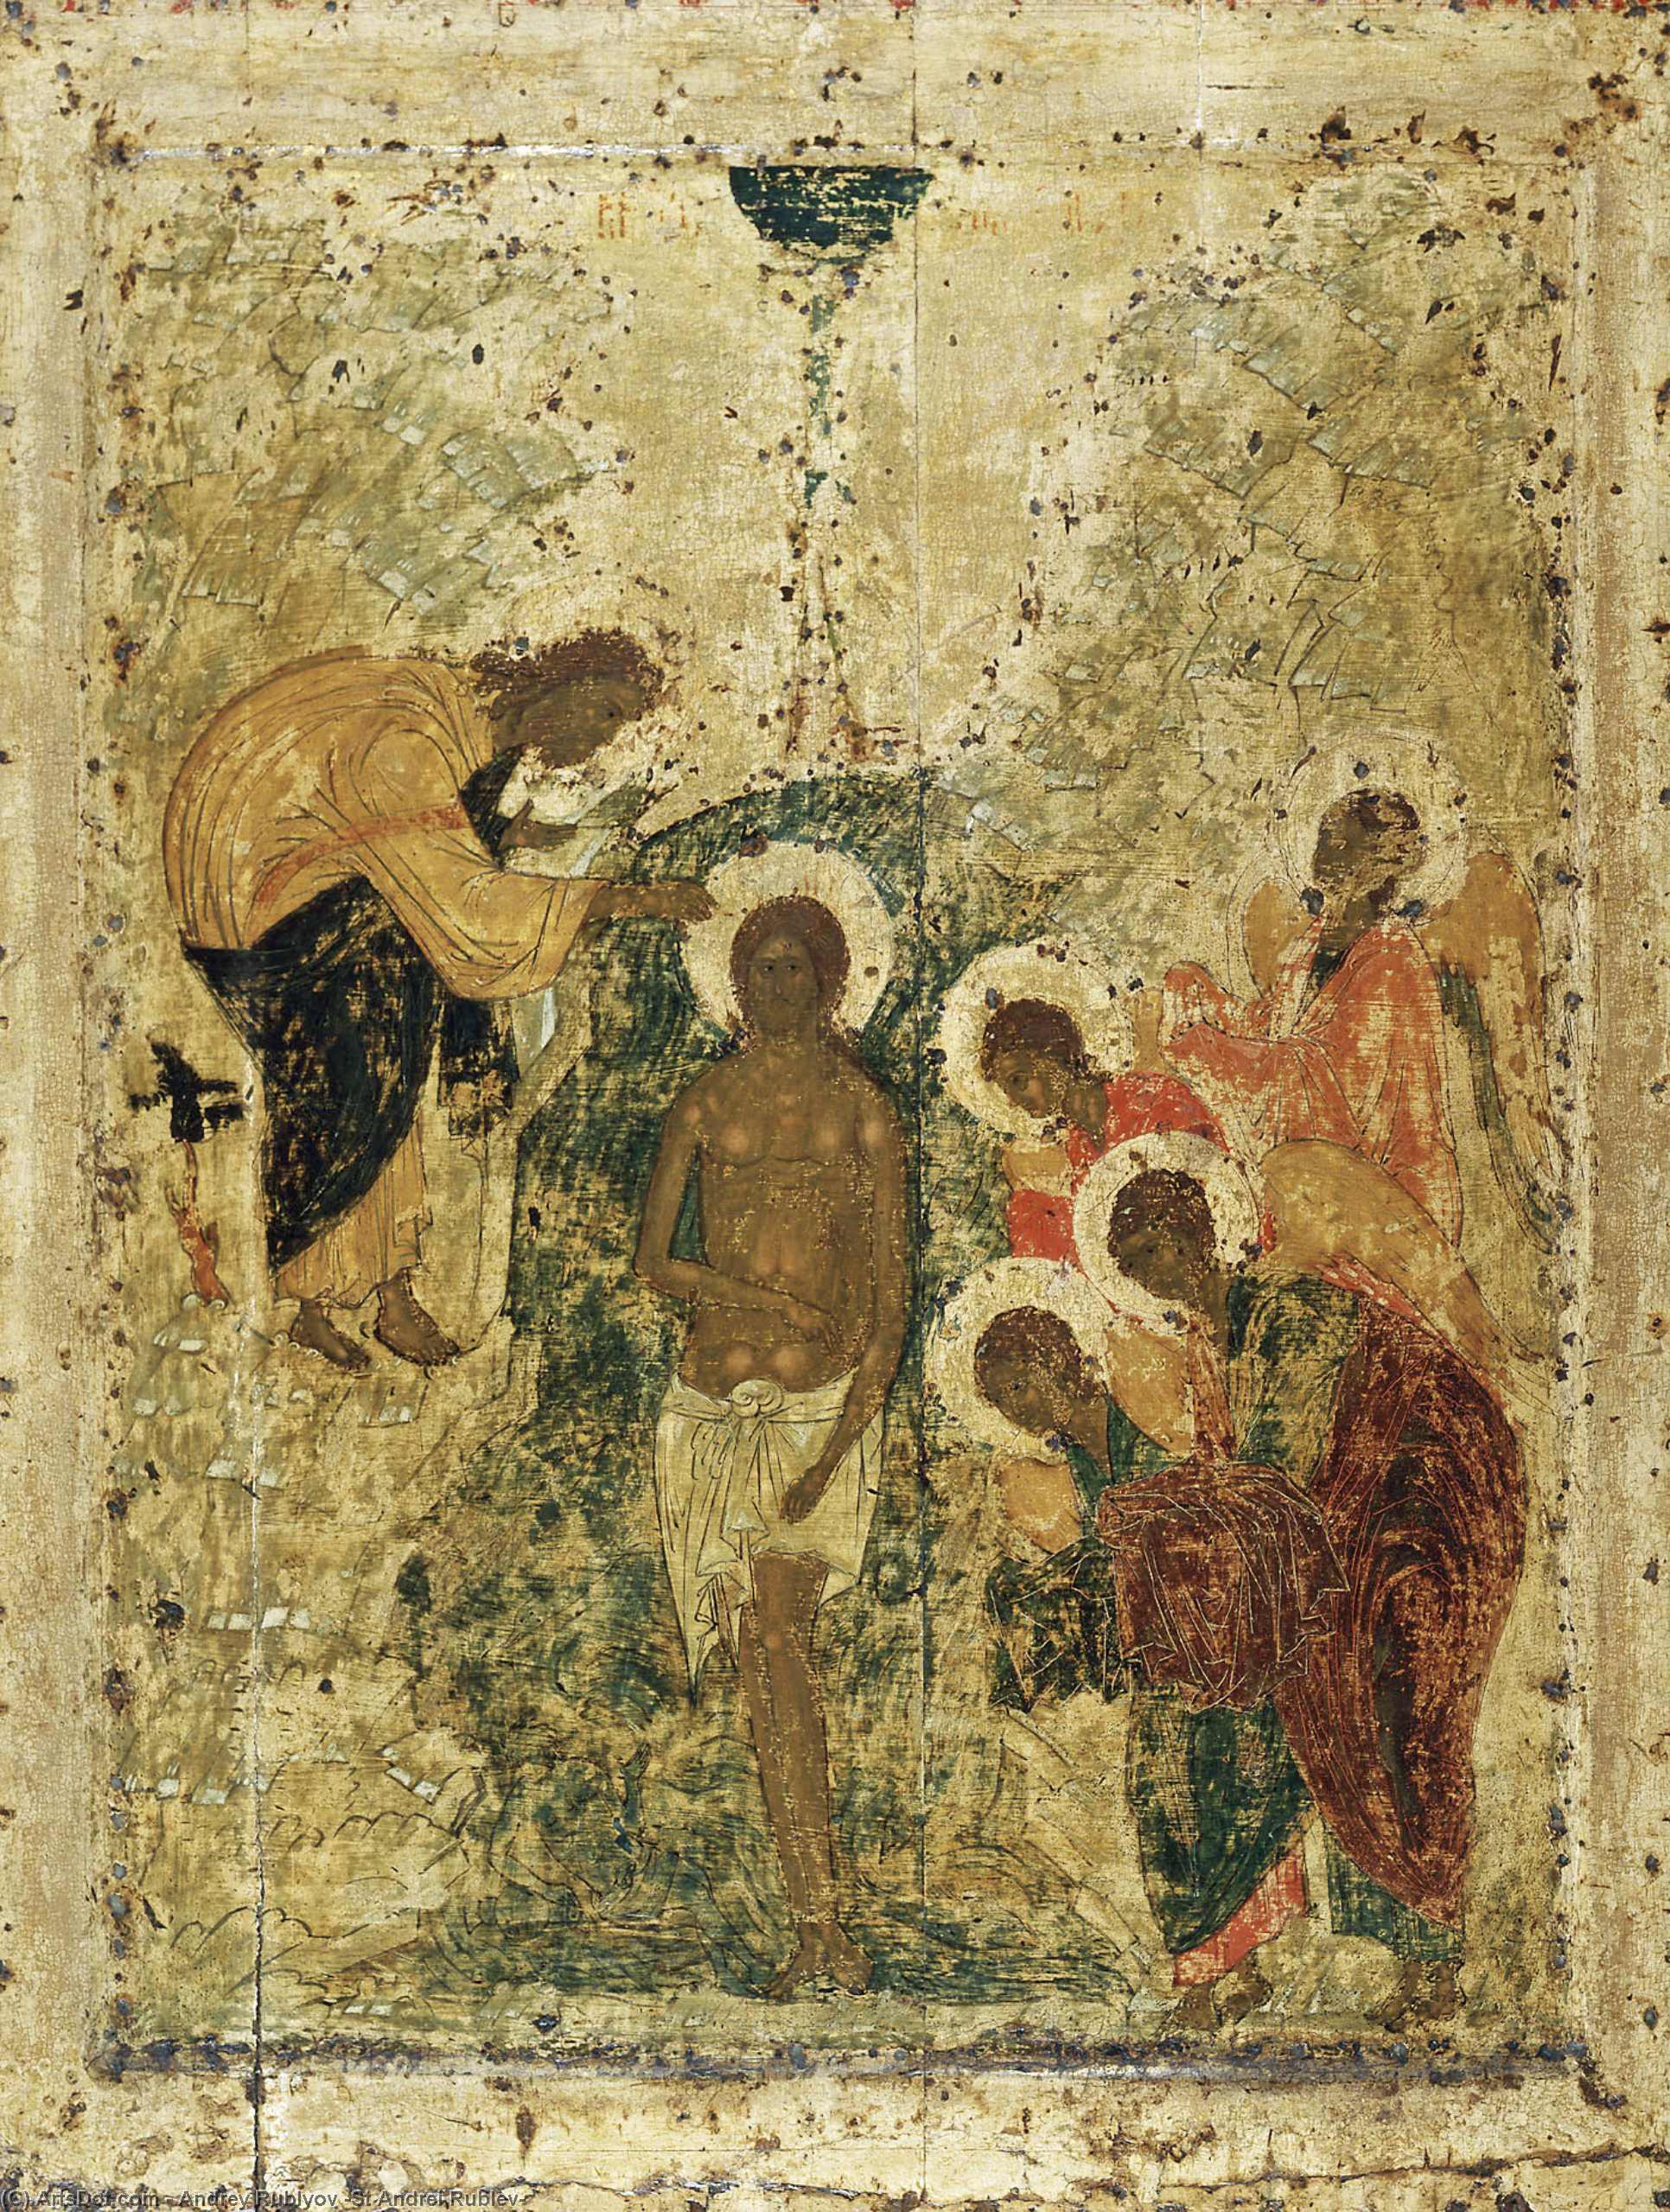 WikiOO.org - 백과 사전 - 회화, 삽화 Andrey Rublyov (St Andrei Rublev) - The Baptism of Christ